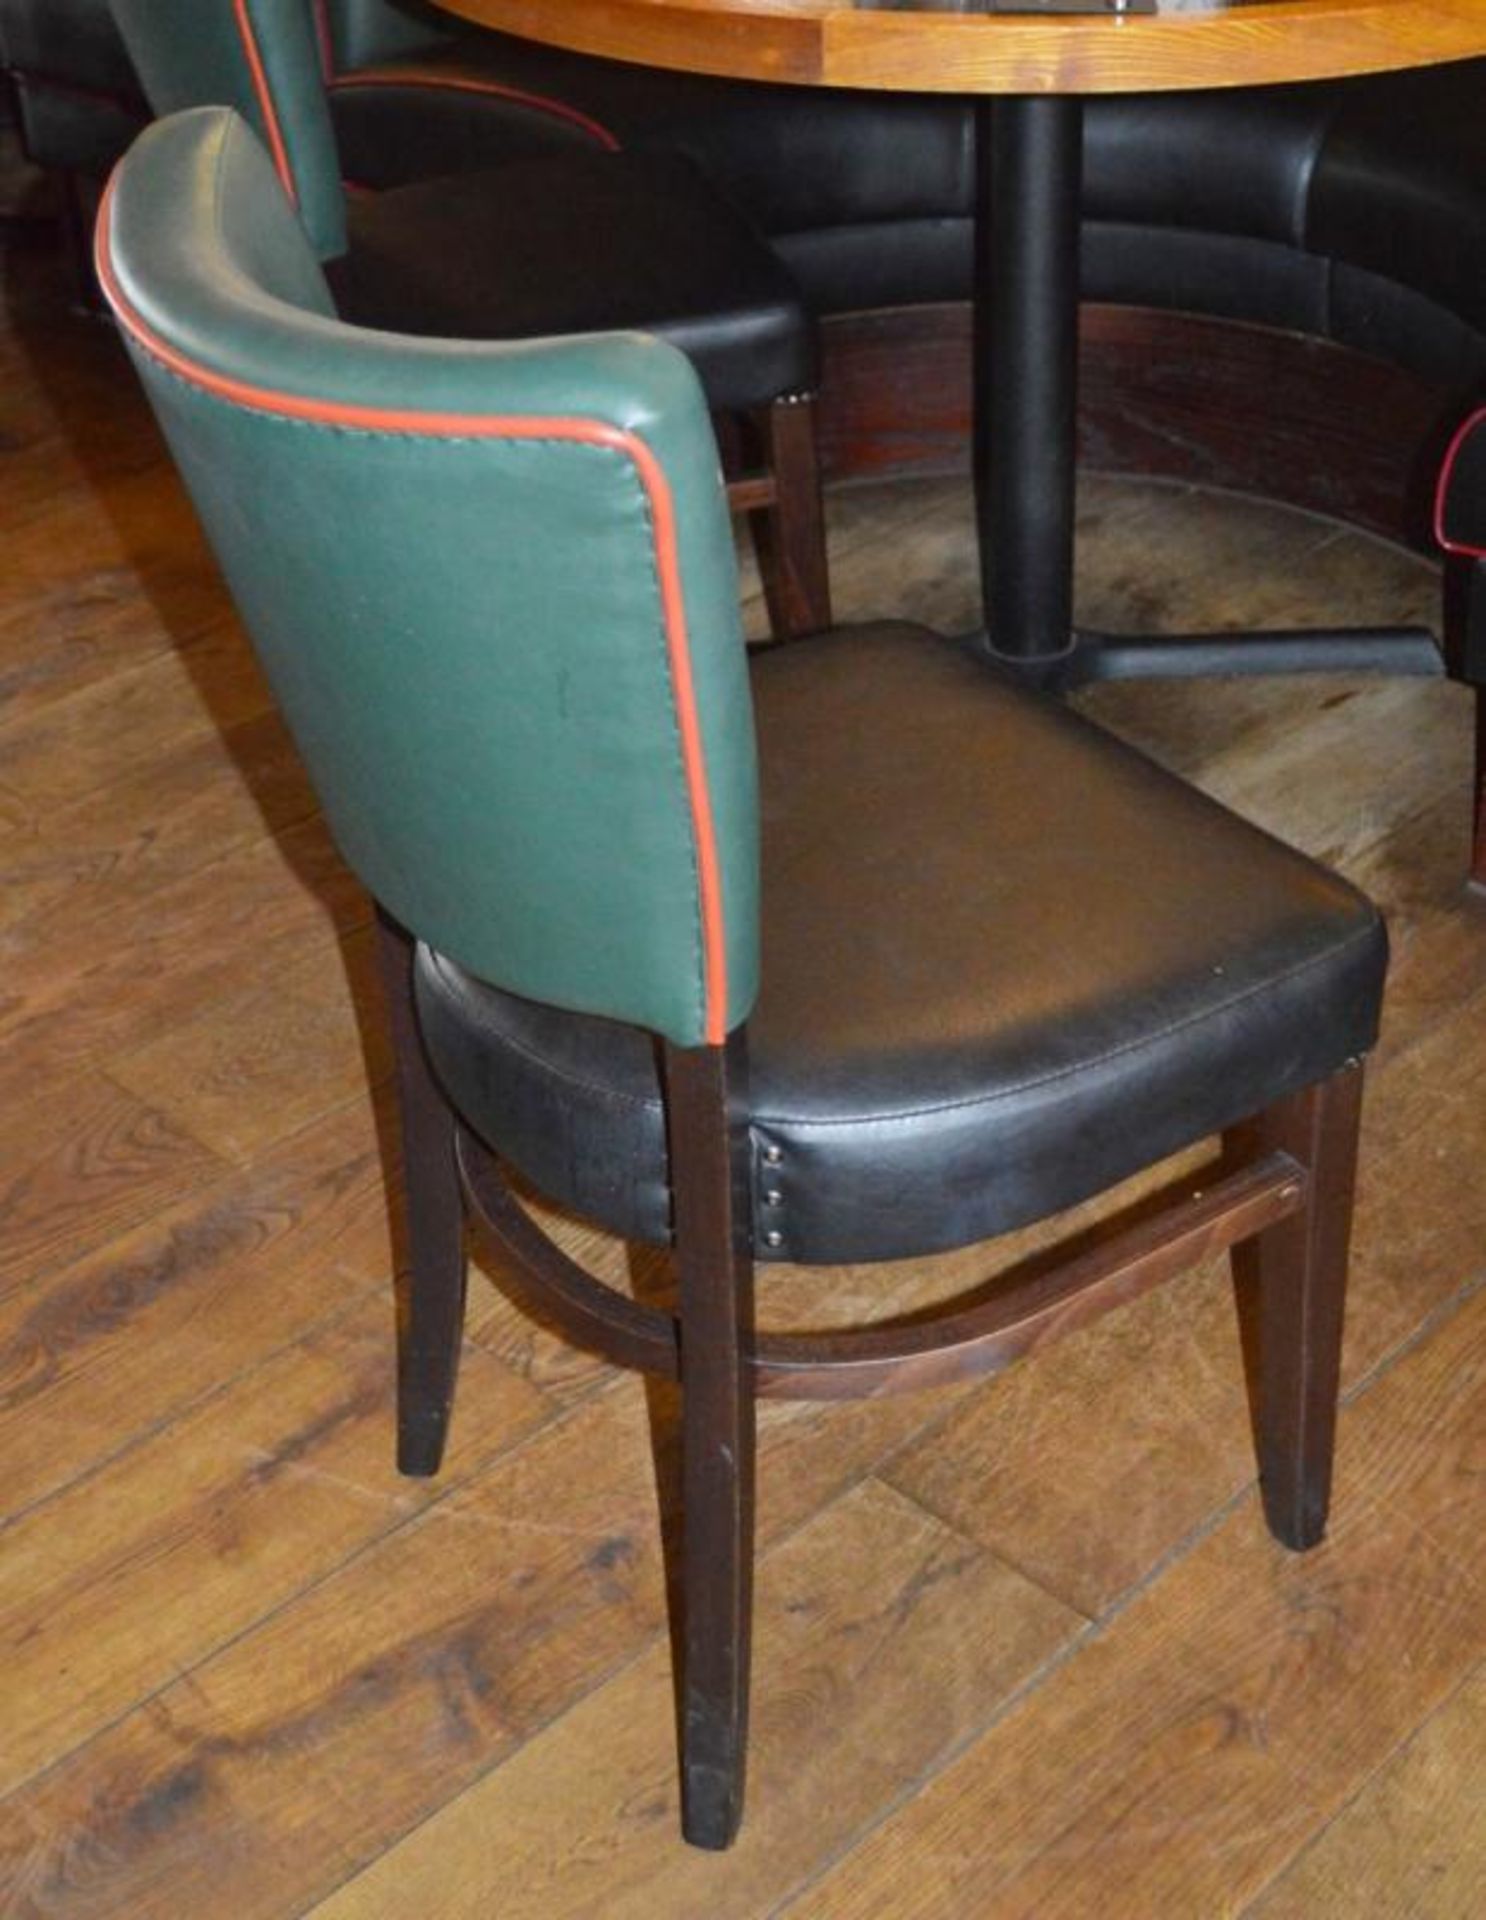 8 x Contemporary Button Back Restaurant Dining Chairs - Upholstered in a Quality Green and Black - Image 5 of 5